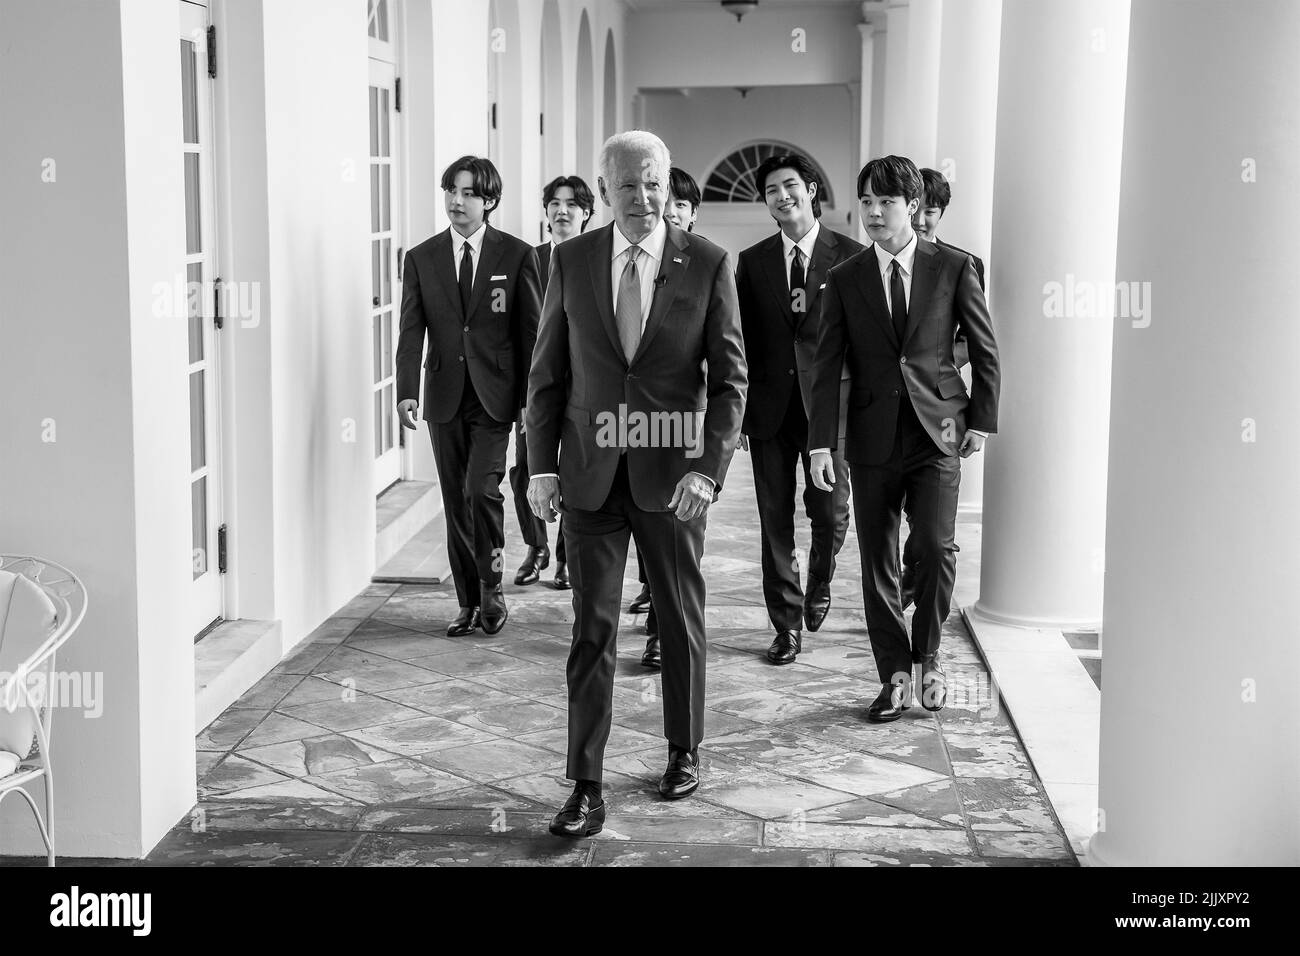 Washington, United States of America. 31 May, 2022. K-Pop band BTS walks behind U.S. President Joe Biden along the West Colonnade of the White House, May 31, 2022, in Washington, D.C. Credit: Adam Schultz/White House Photo/Alamy Live News Stock Photo